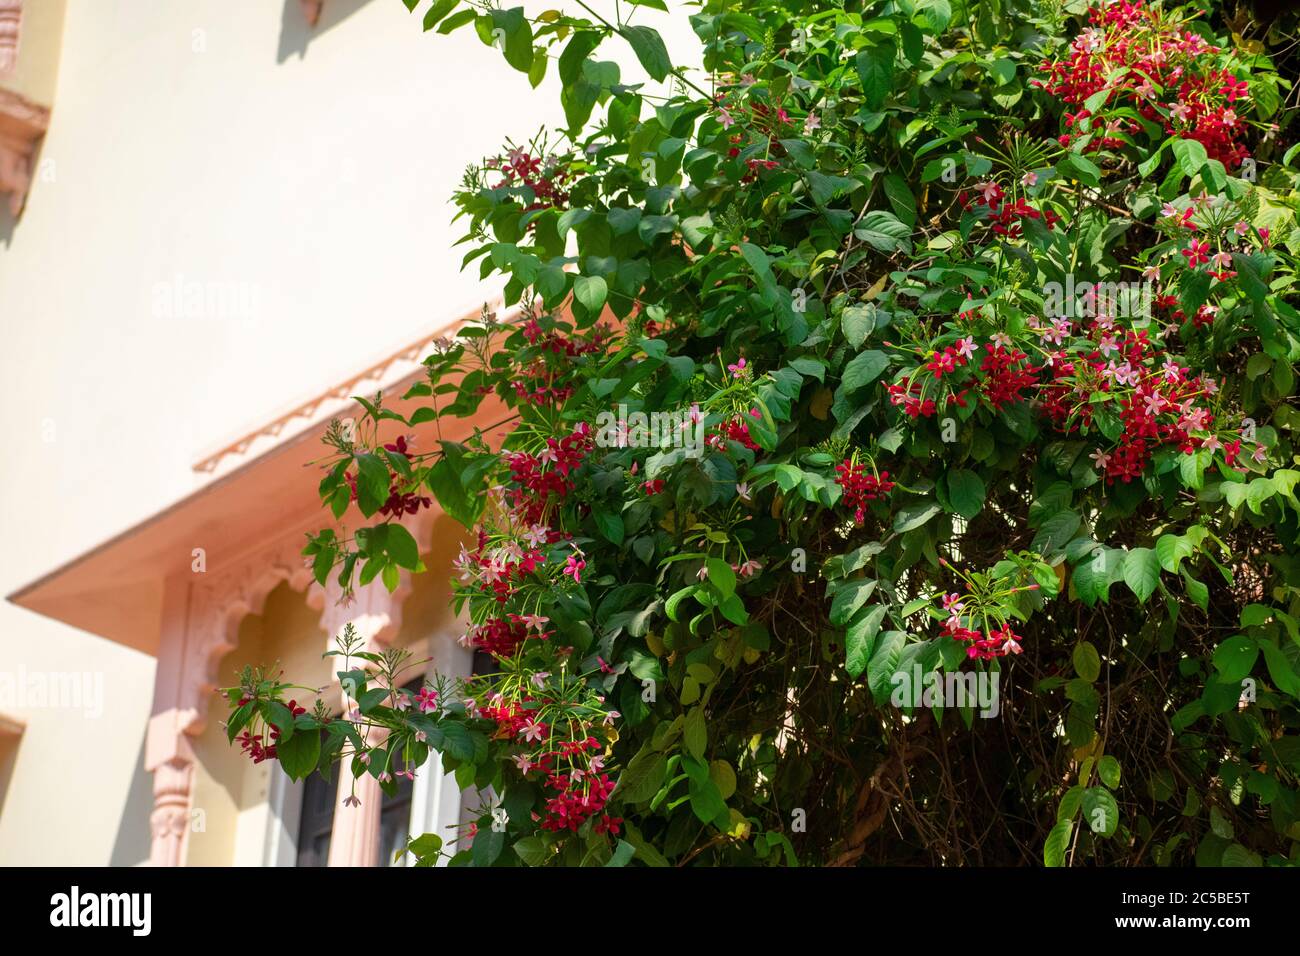 rangoon creeper, and combretum indicum is a vine with red flower clusters and is found in asia Stock Photo